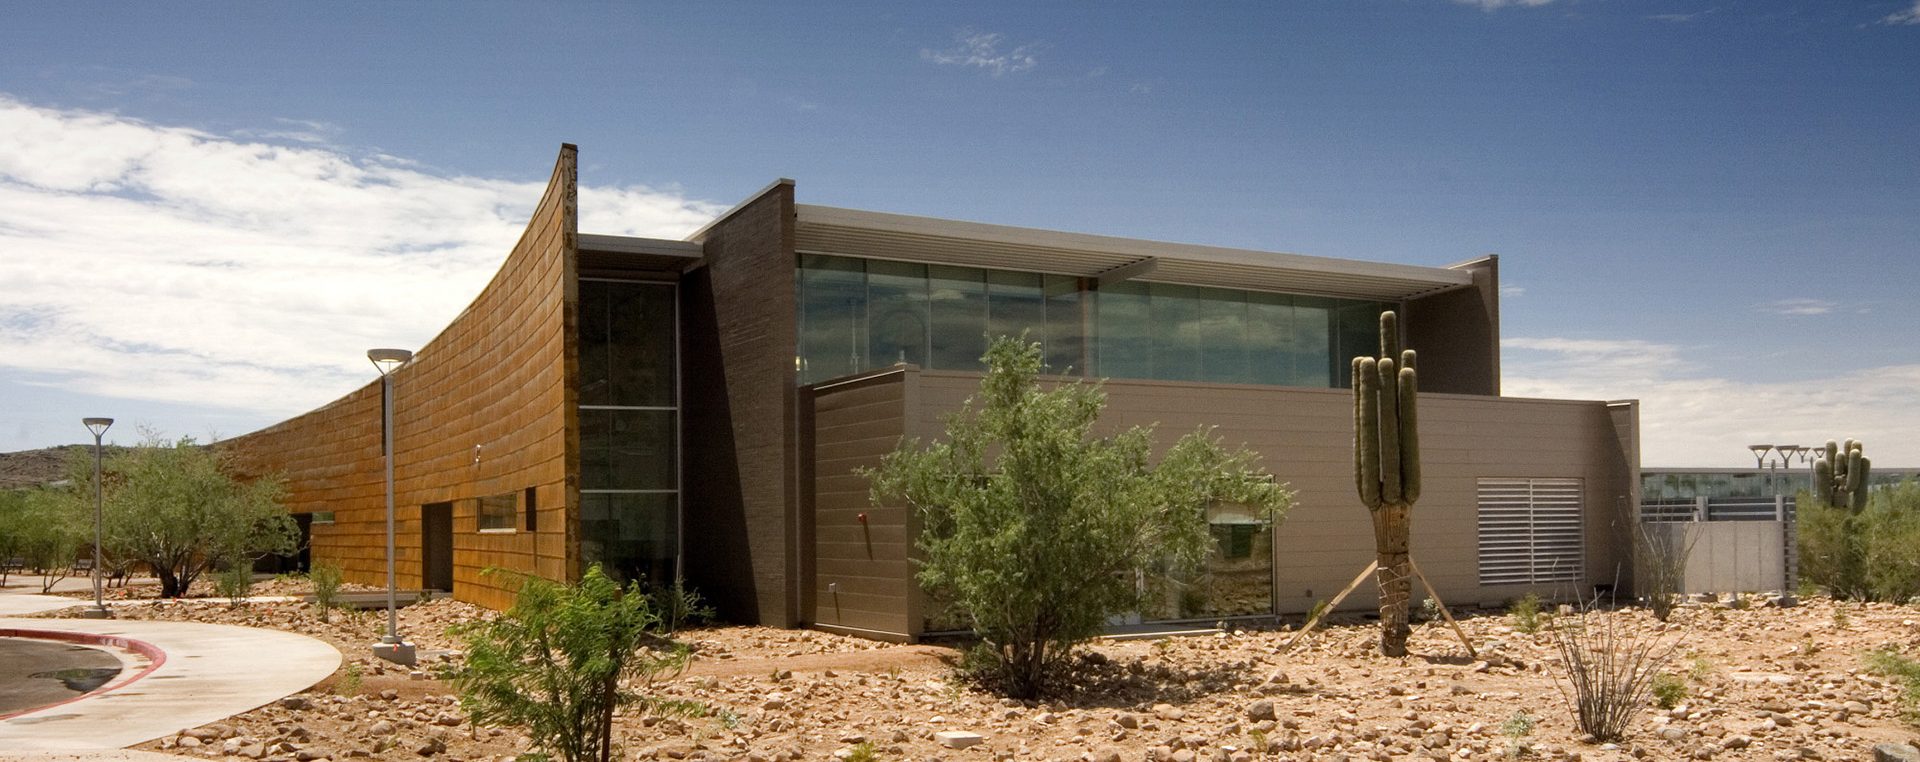 A building with rocks and cactus in the background, provided by MKB Construction Services.